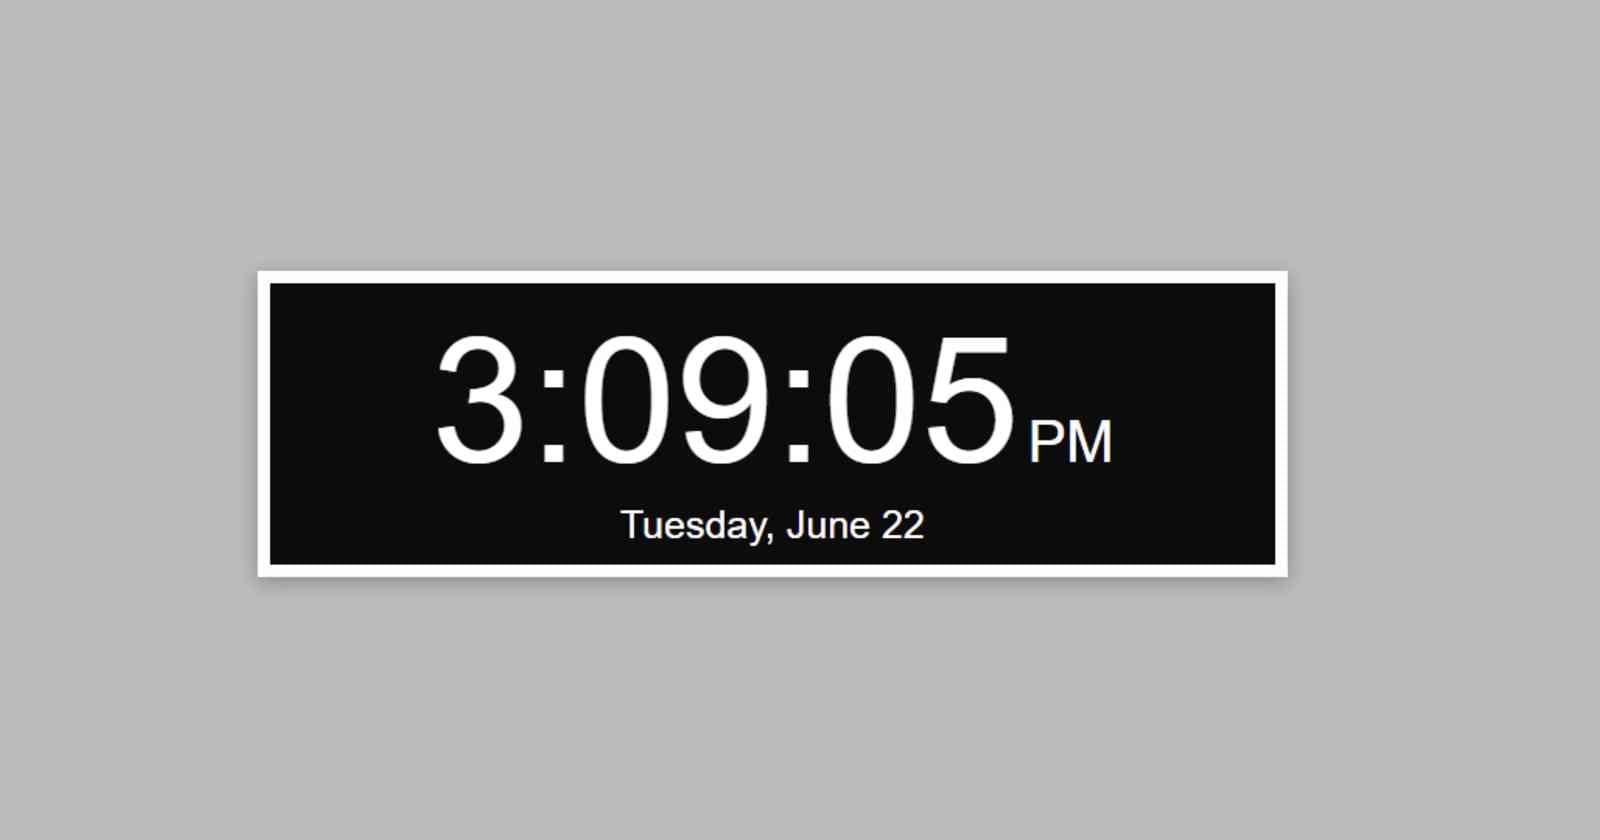 How to Make a Digital Clock using HTML, CSS, and JavaScript